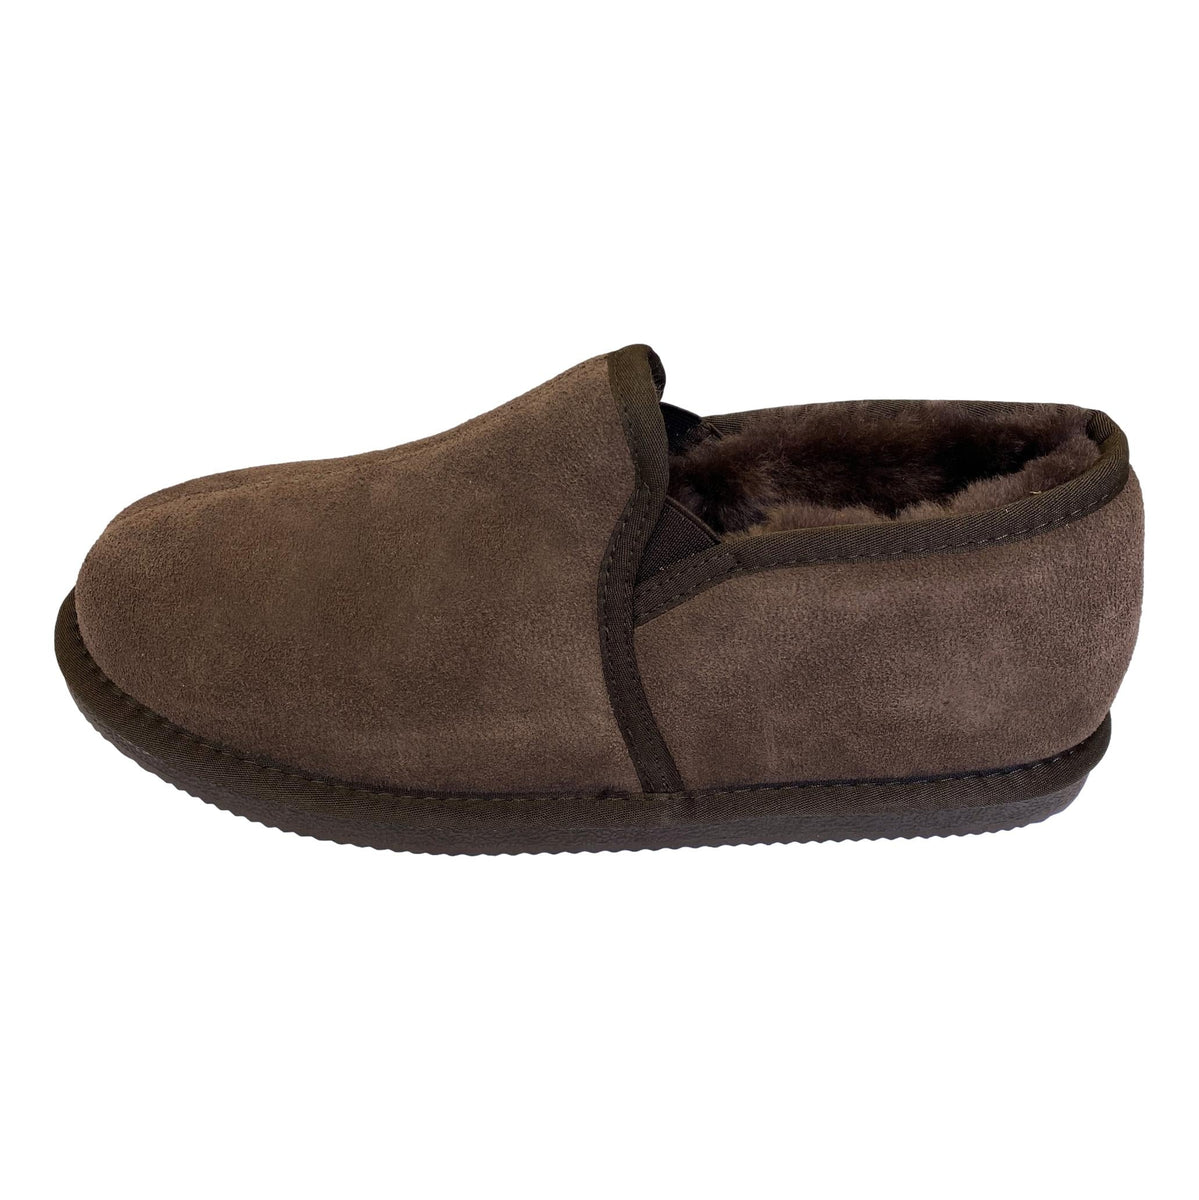 Deluxe Mens 'Sam' Sheepskin Slippers with Hard Sole - Chocolate ...